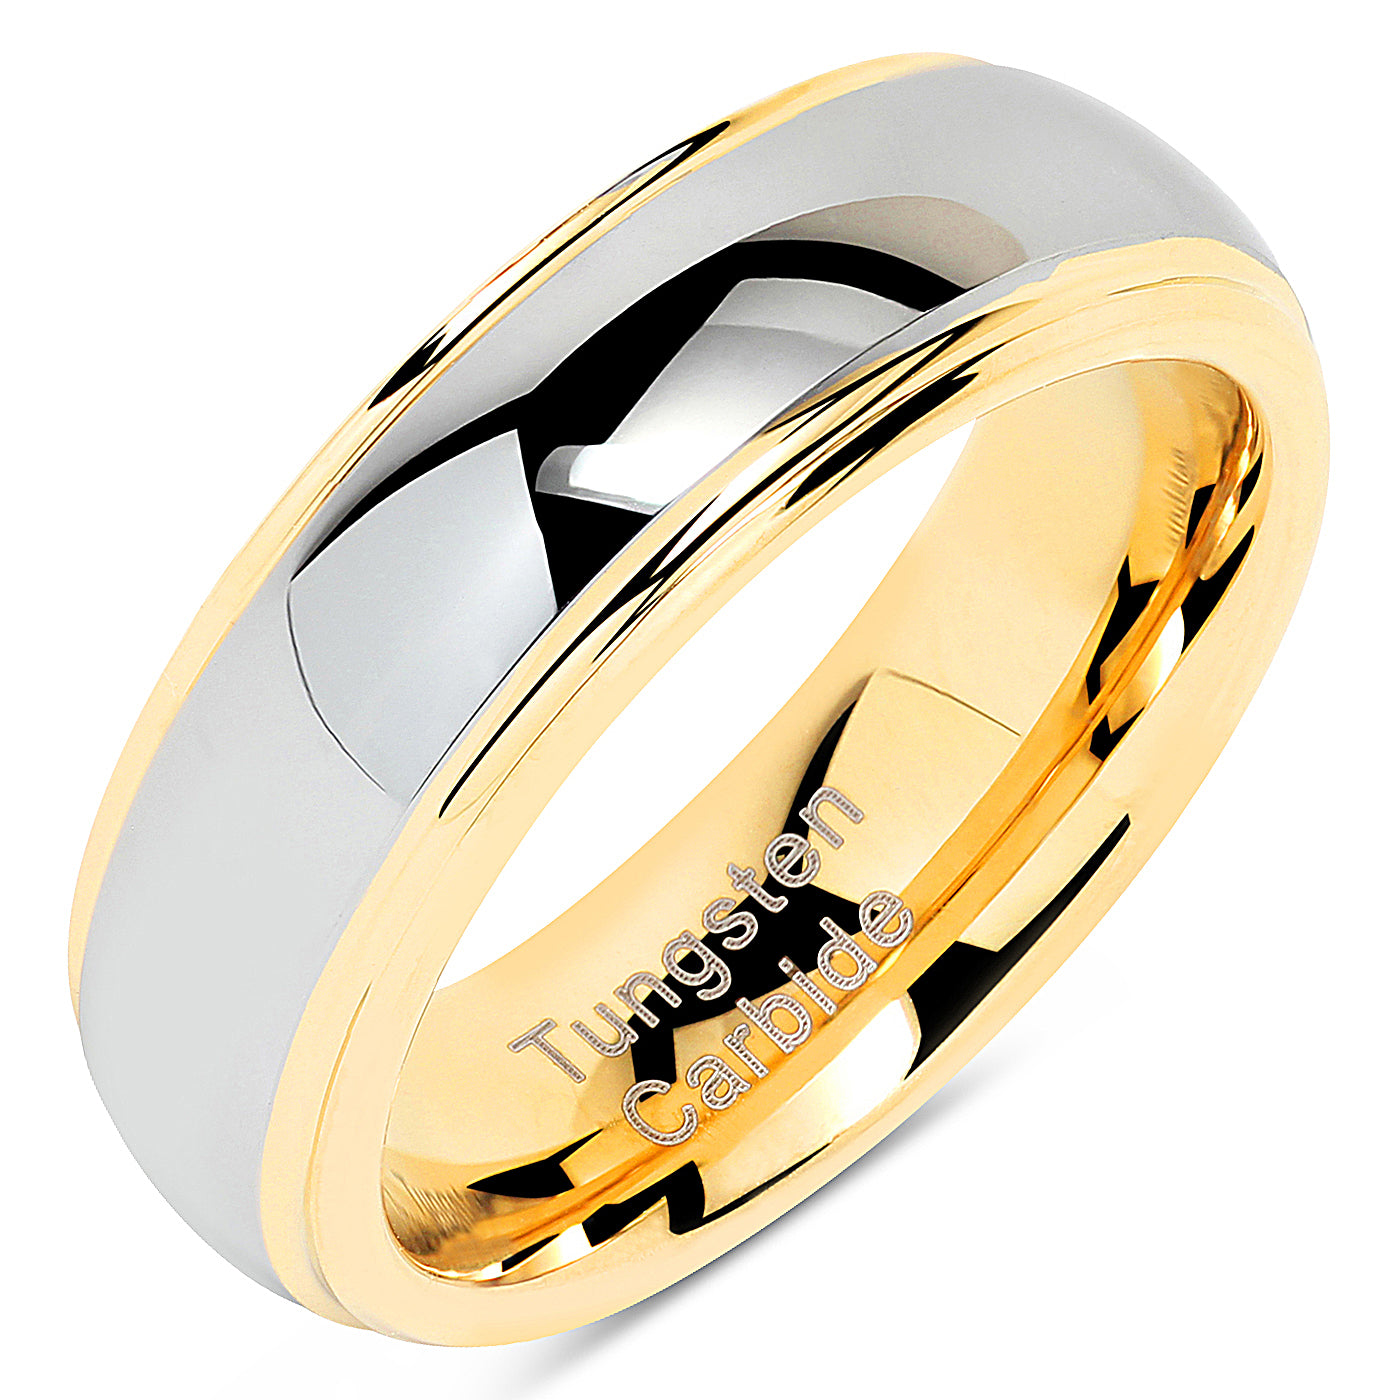 6mm Engraved Tungsten Rings Wedding Band Two Tones Gold Silver